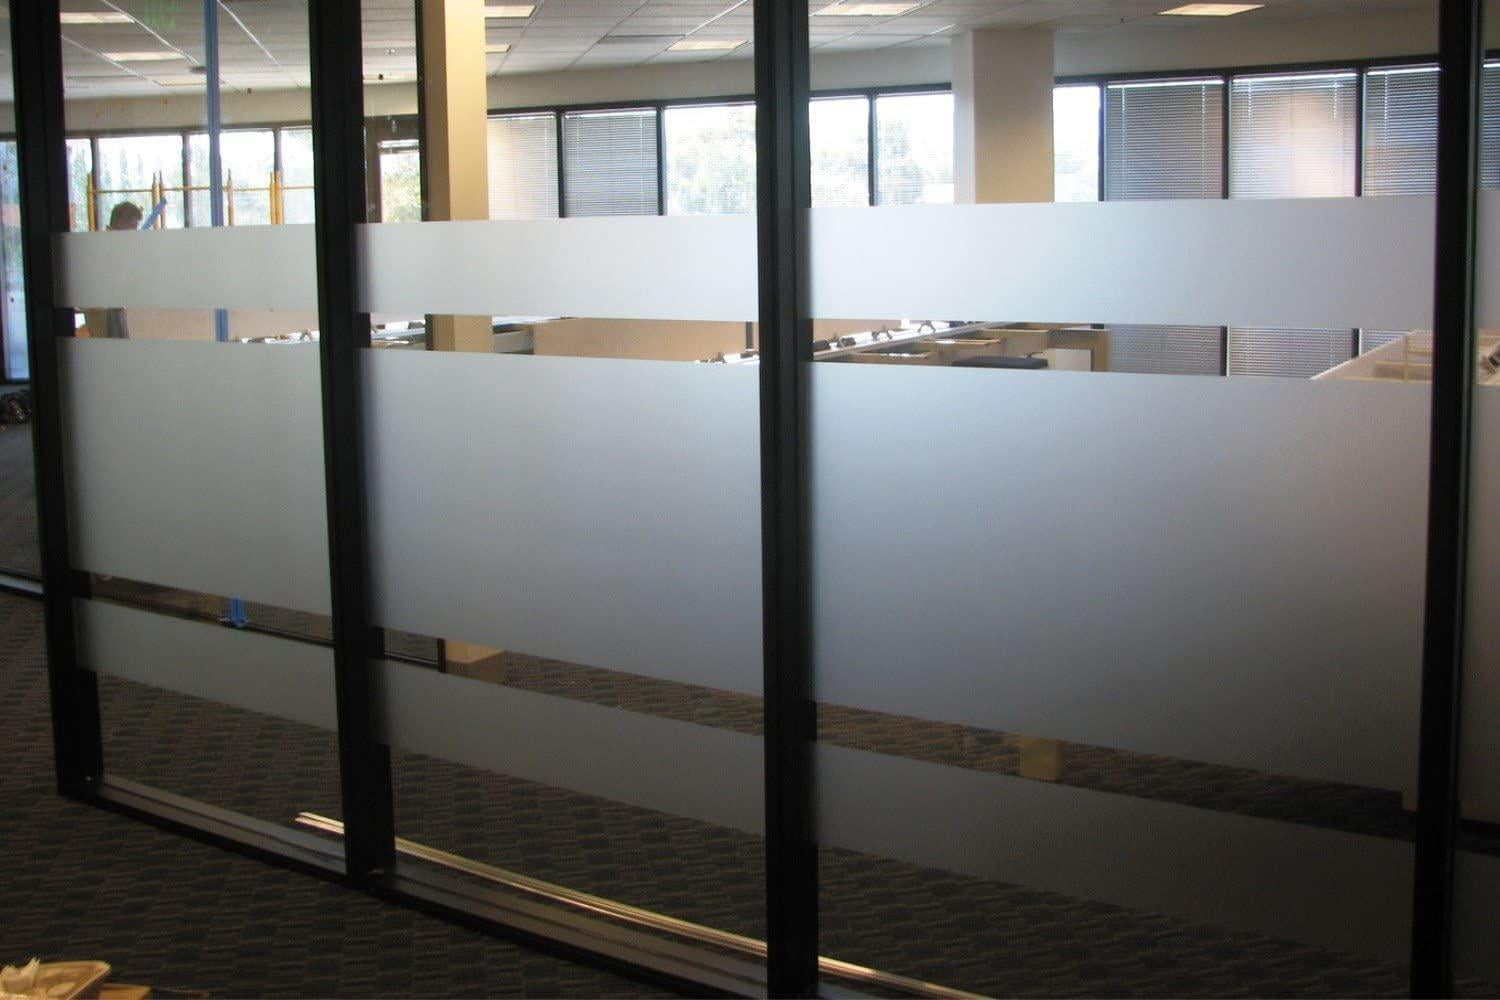 Frosted Privacy Vinyl Film For Windows & Office Doors